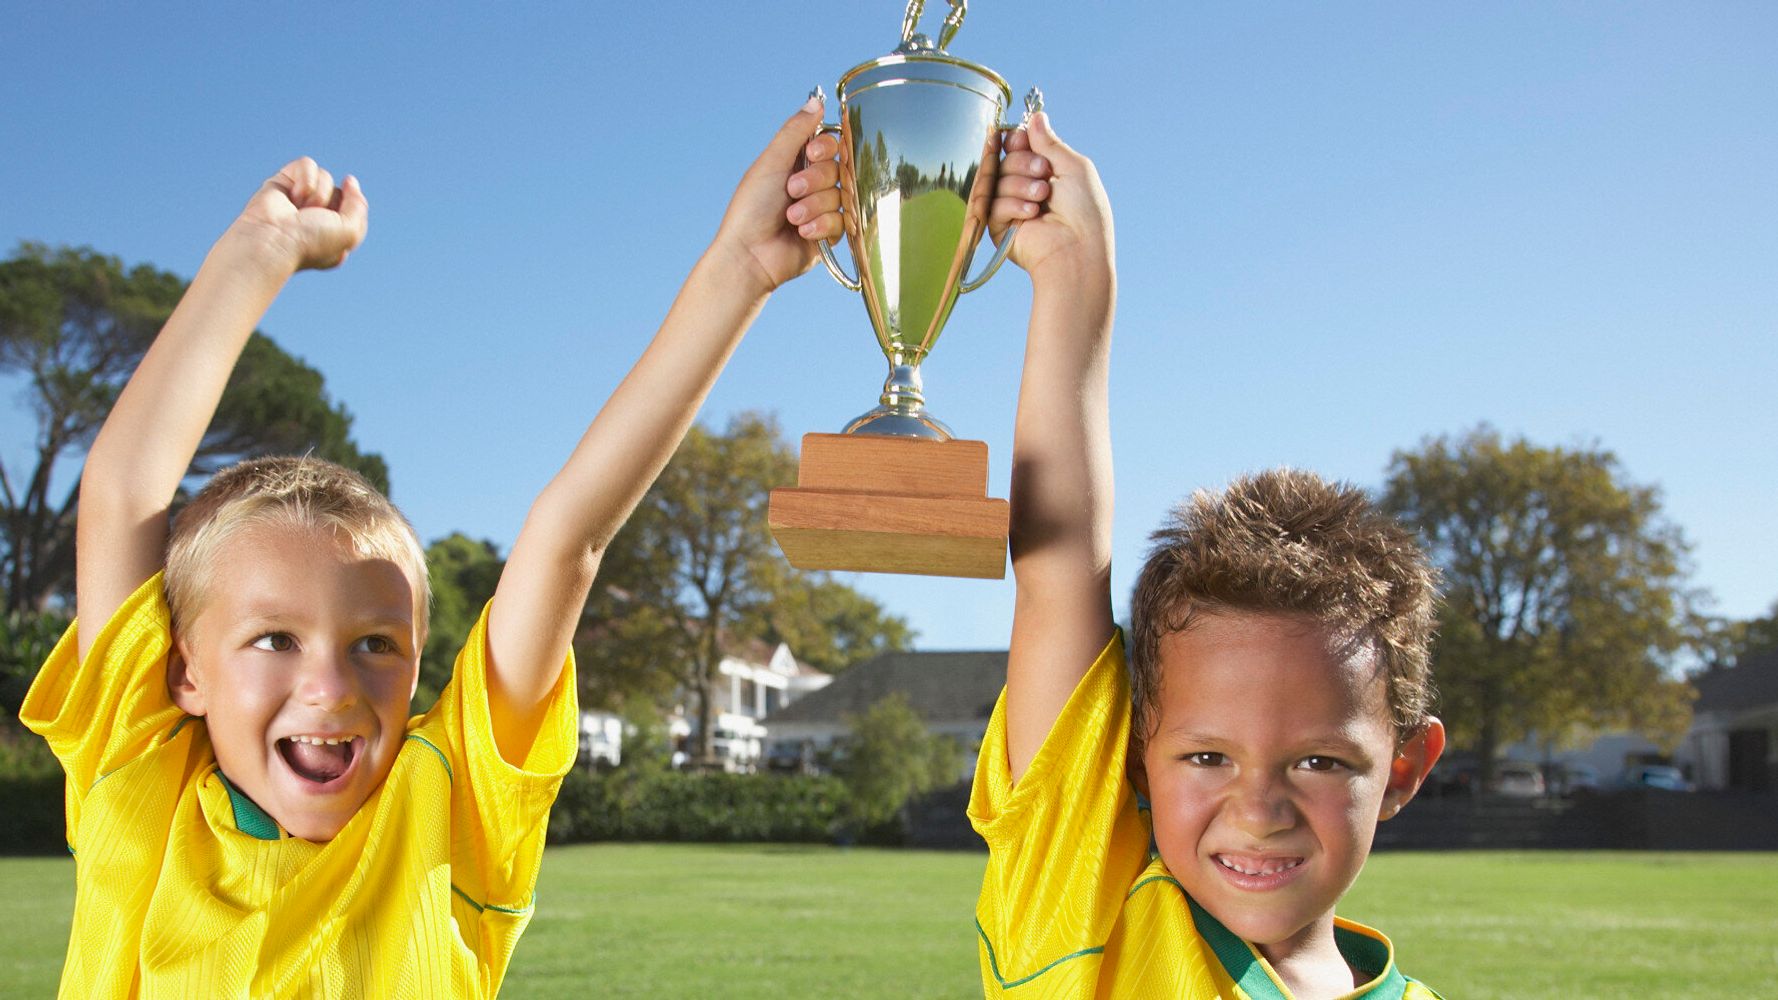 competition-why-kids-need-to-learn-how-to-win-and-lose-huffpost-uk-life